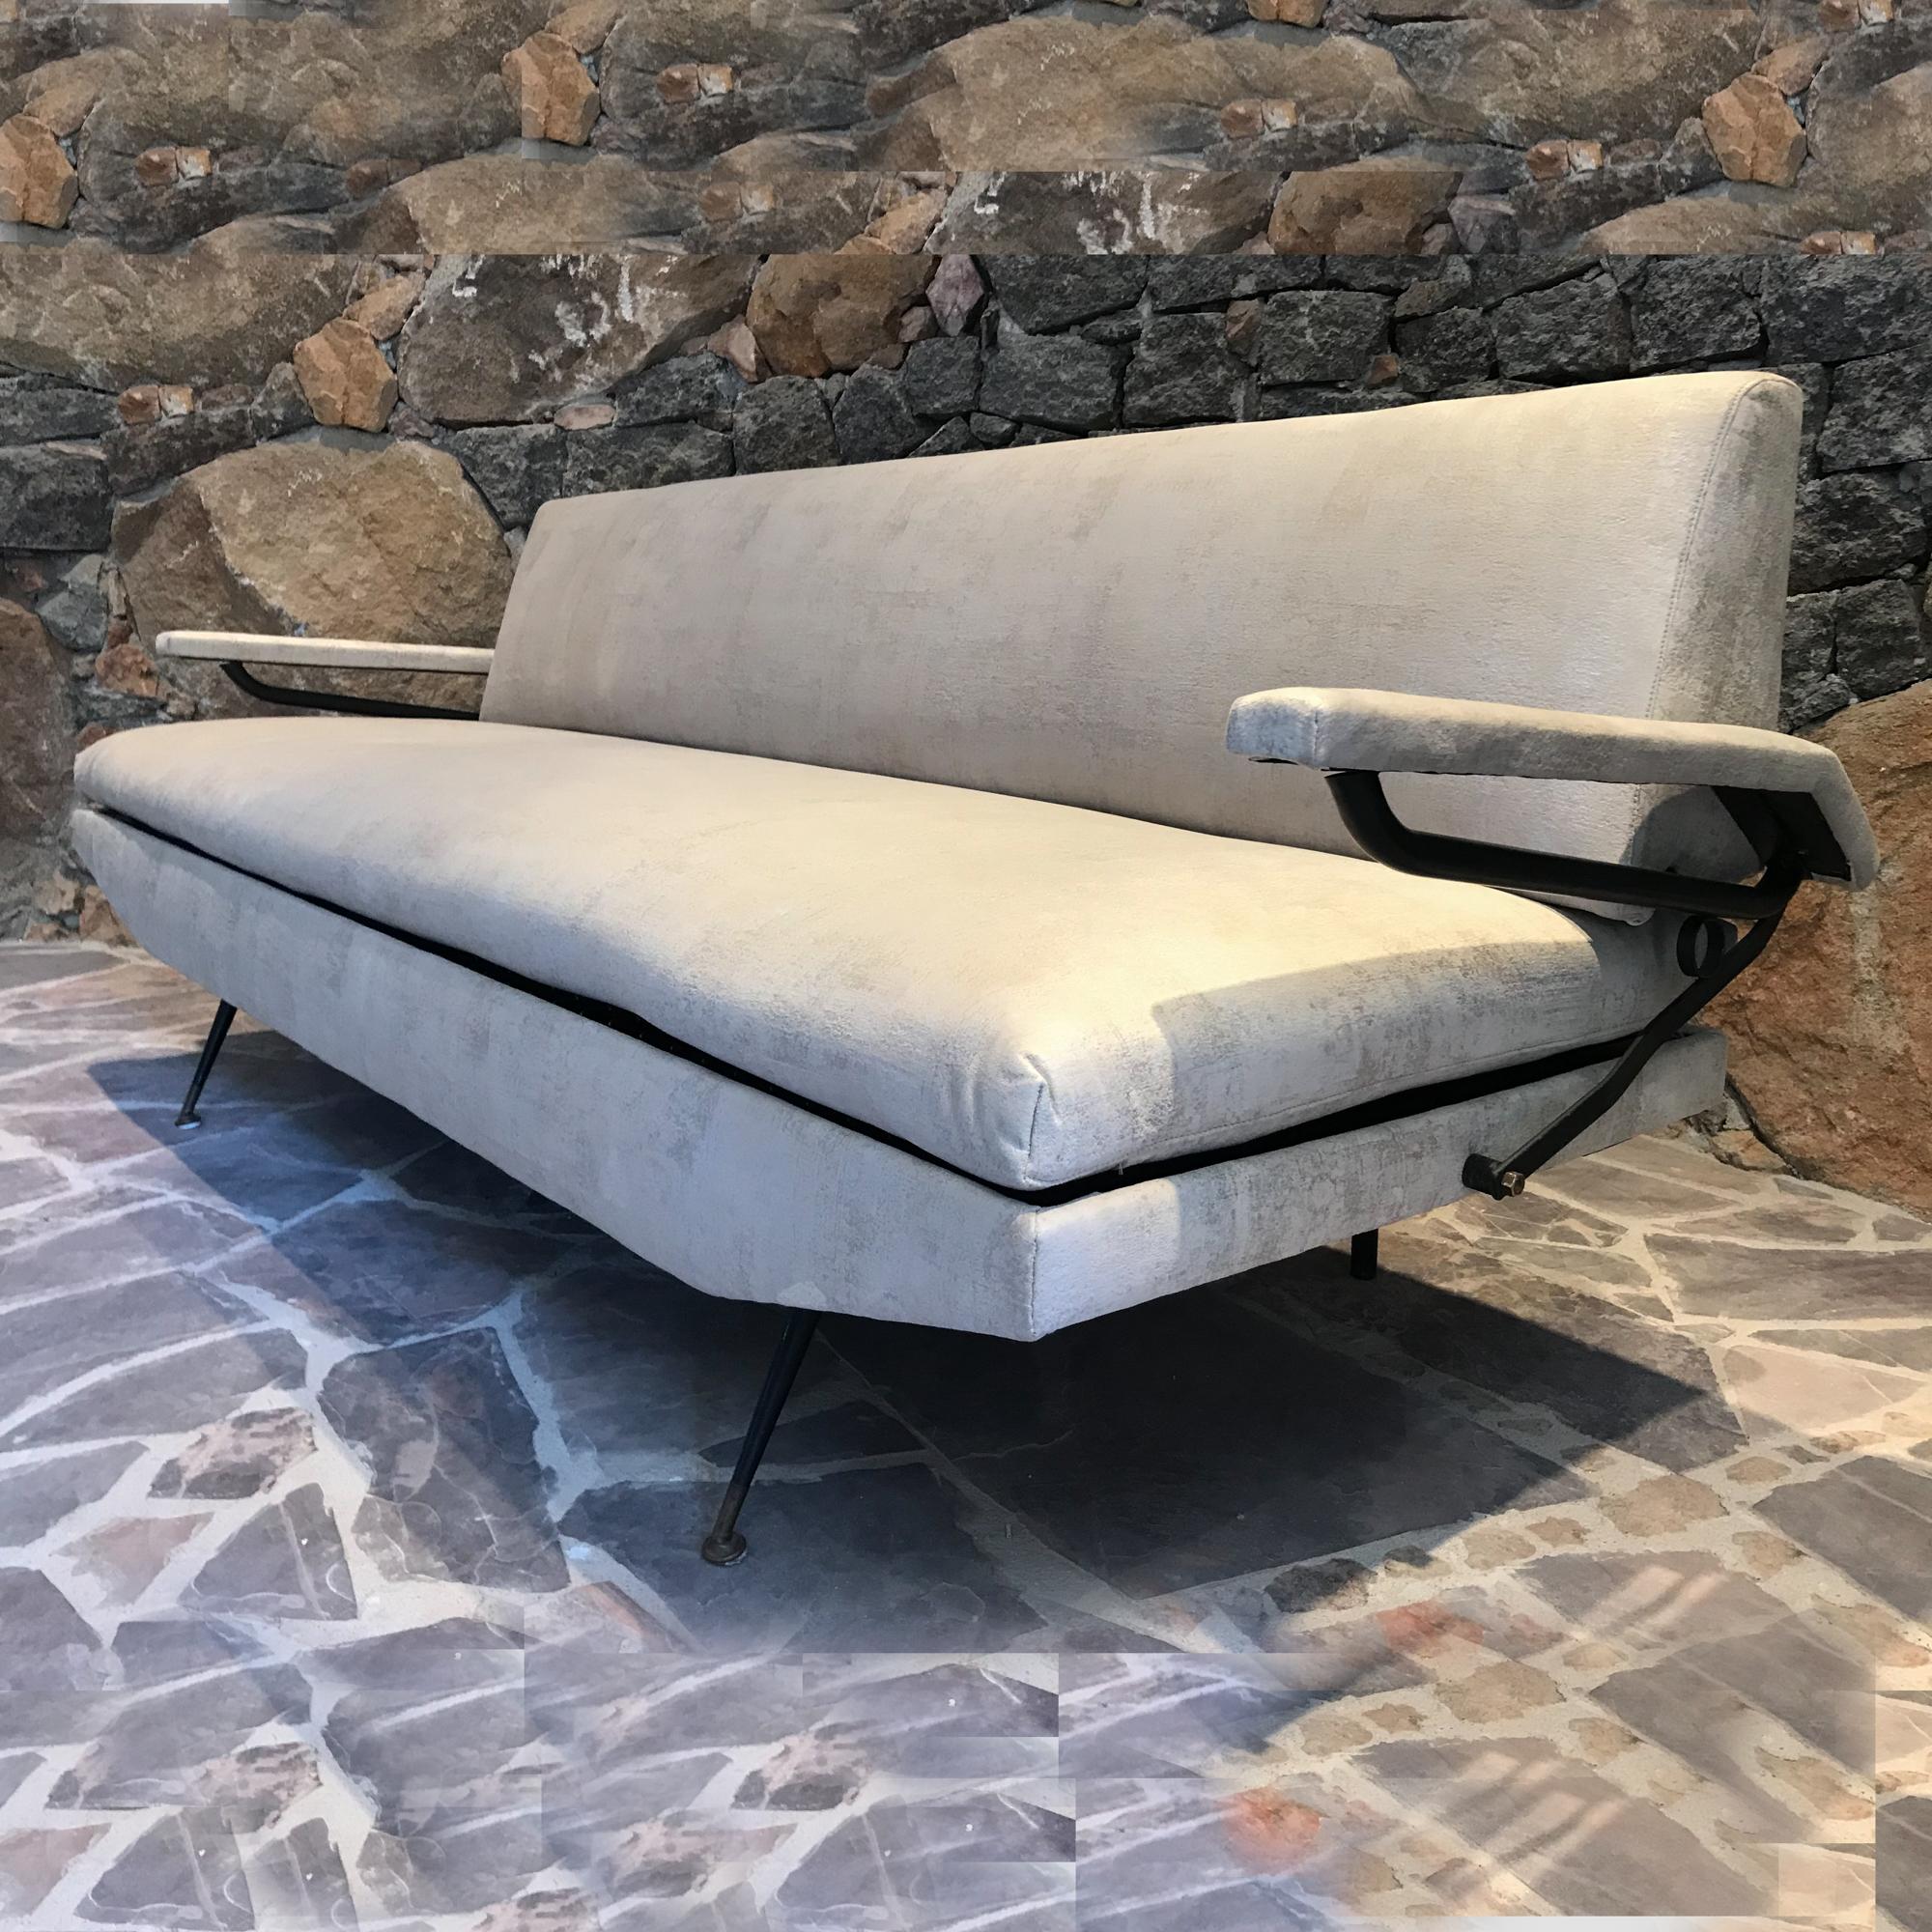 Italian Sofa-Day Bed in the manner of architect designer Osvaldo Borsani.
Iron and Wood.
Unmarked.
Made in Italy 1950s. 
Arms can be lifted providing more room for lounging and afternoon siesta. 
Daybed has adjustments underneath the cushions that